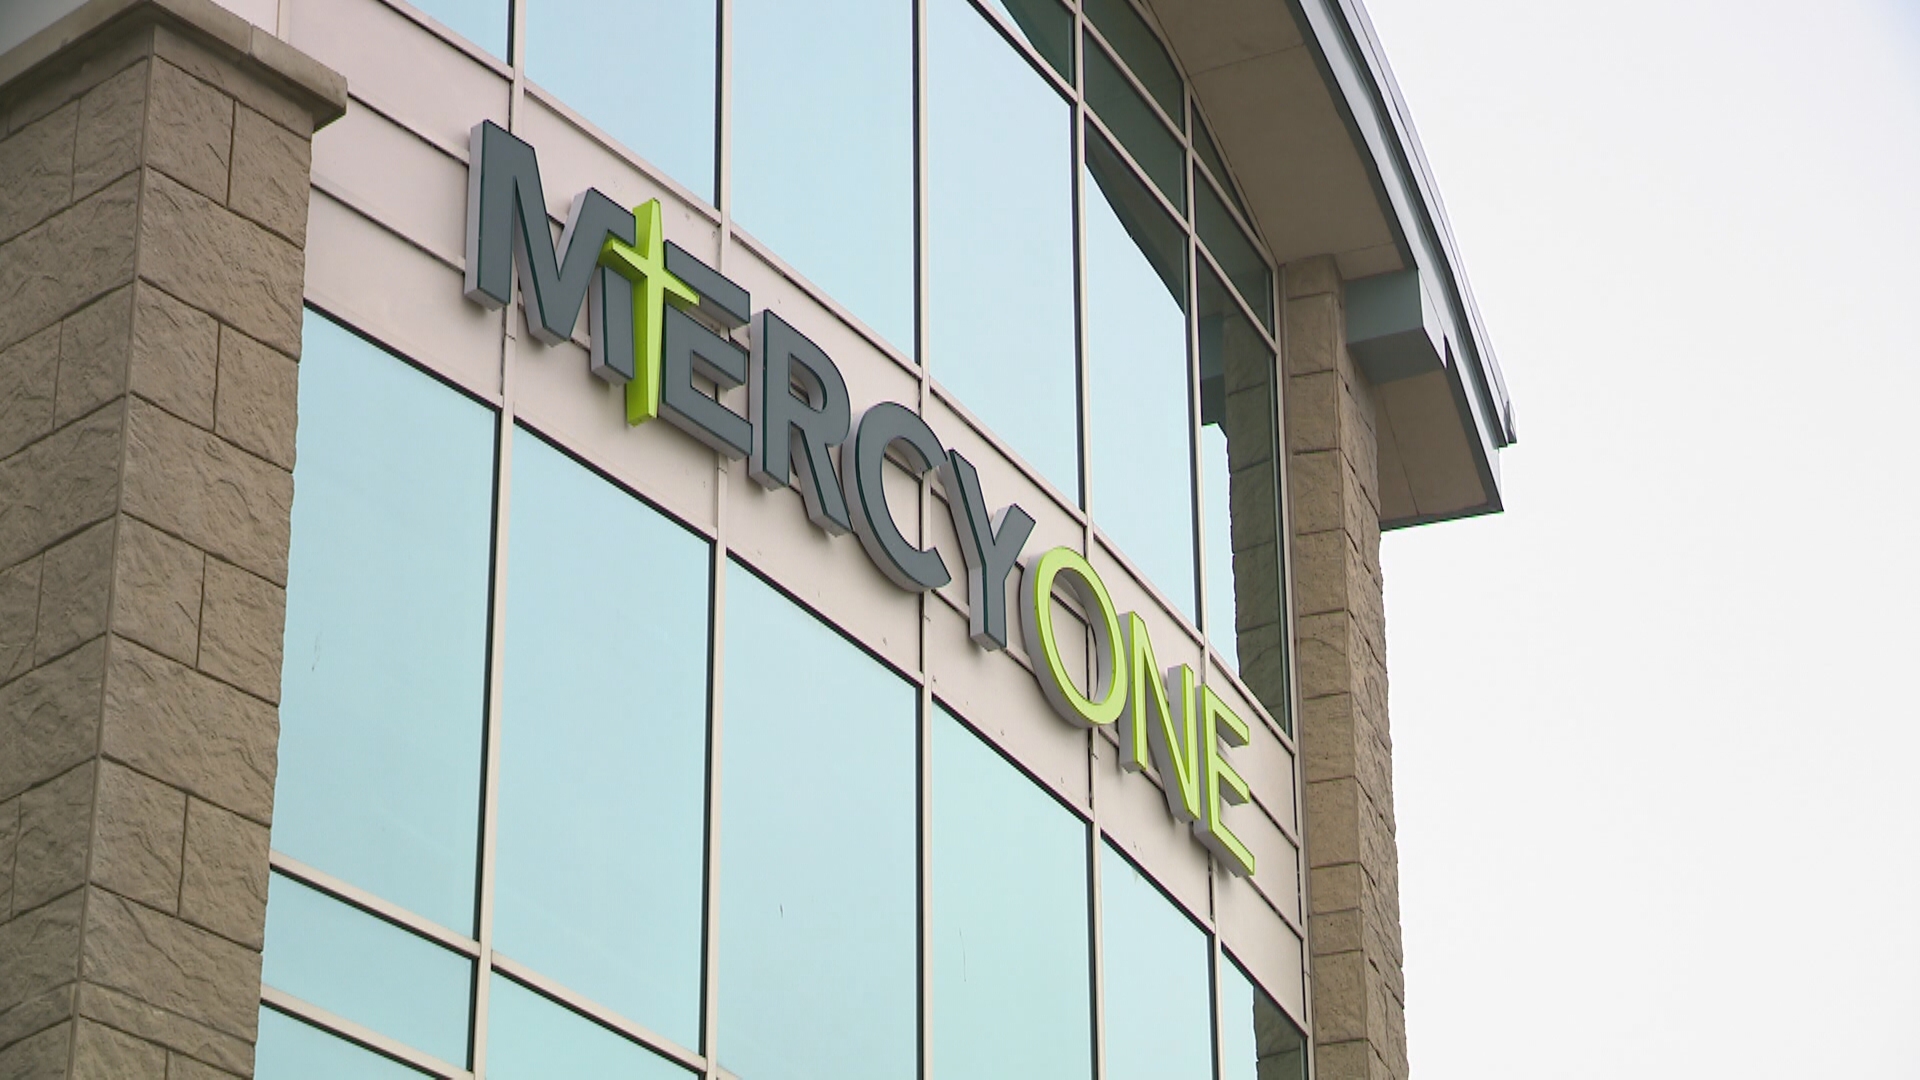 MercyOne said in April the primary reason to close was an "inability to recruit a specialty physician after a two-year search," following a physician's retirement.